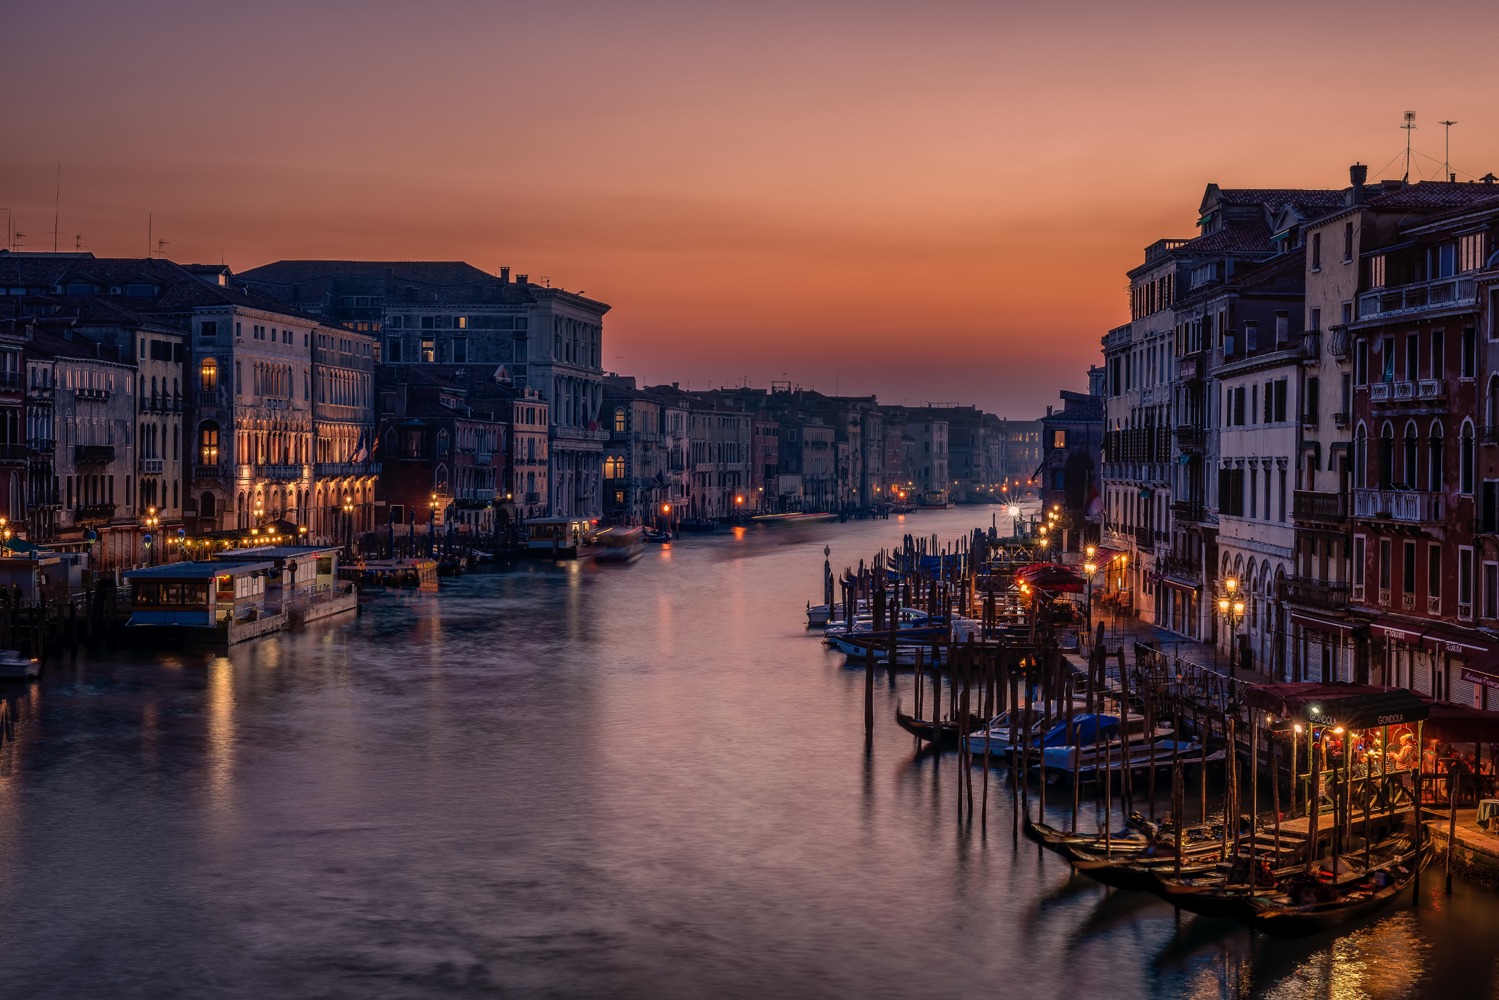 Se Venice Grand Canal at Sunset hos Picment.dk